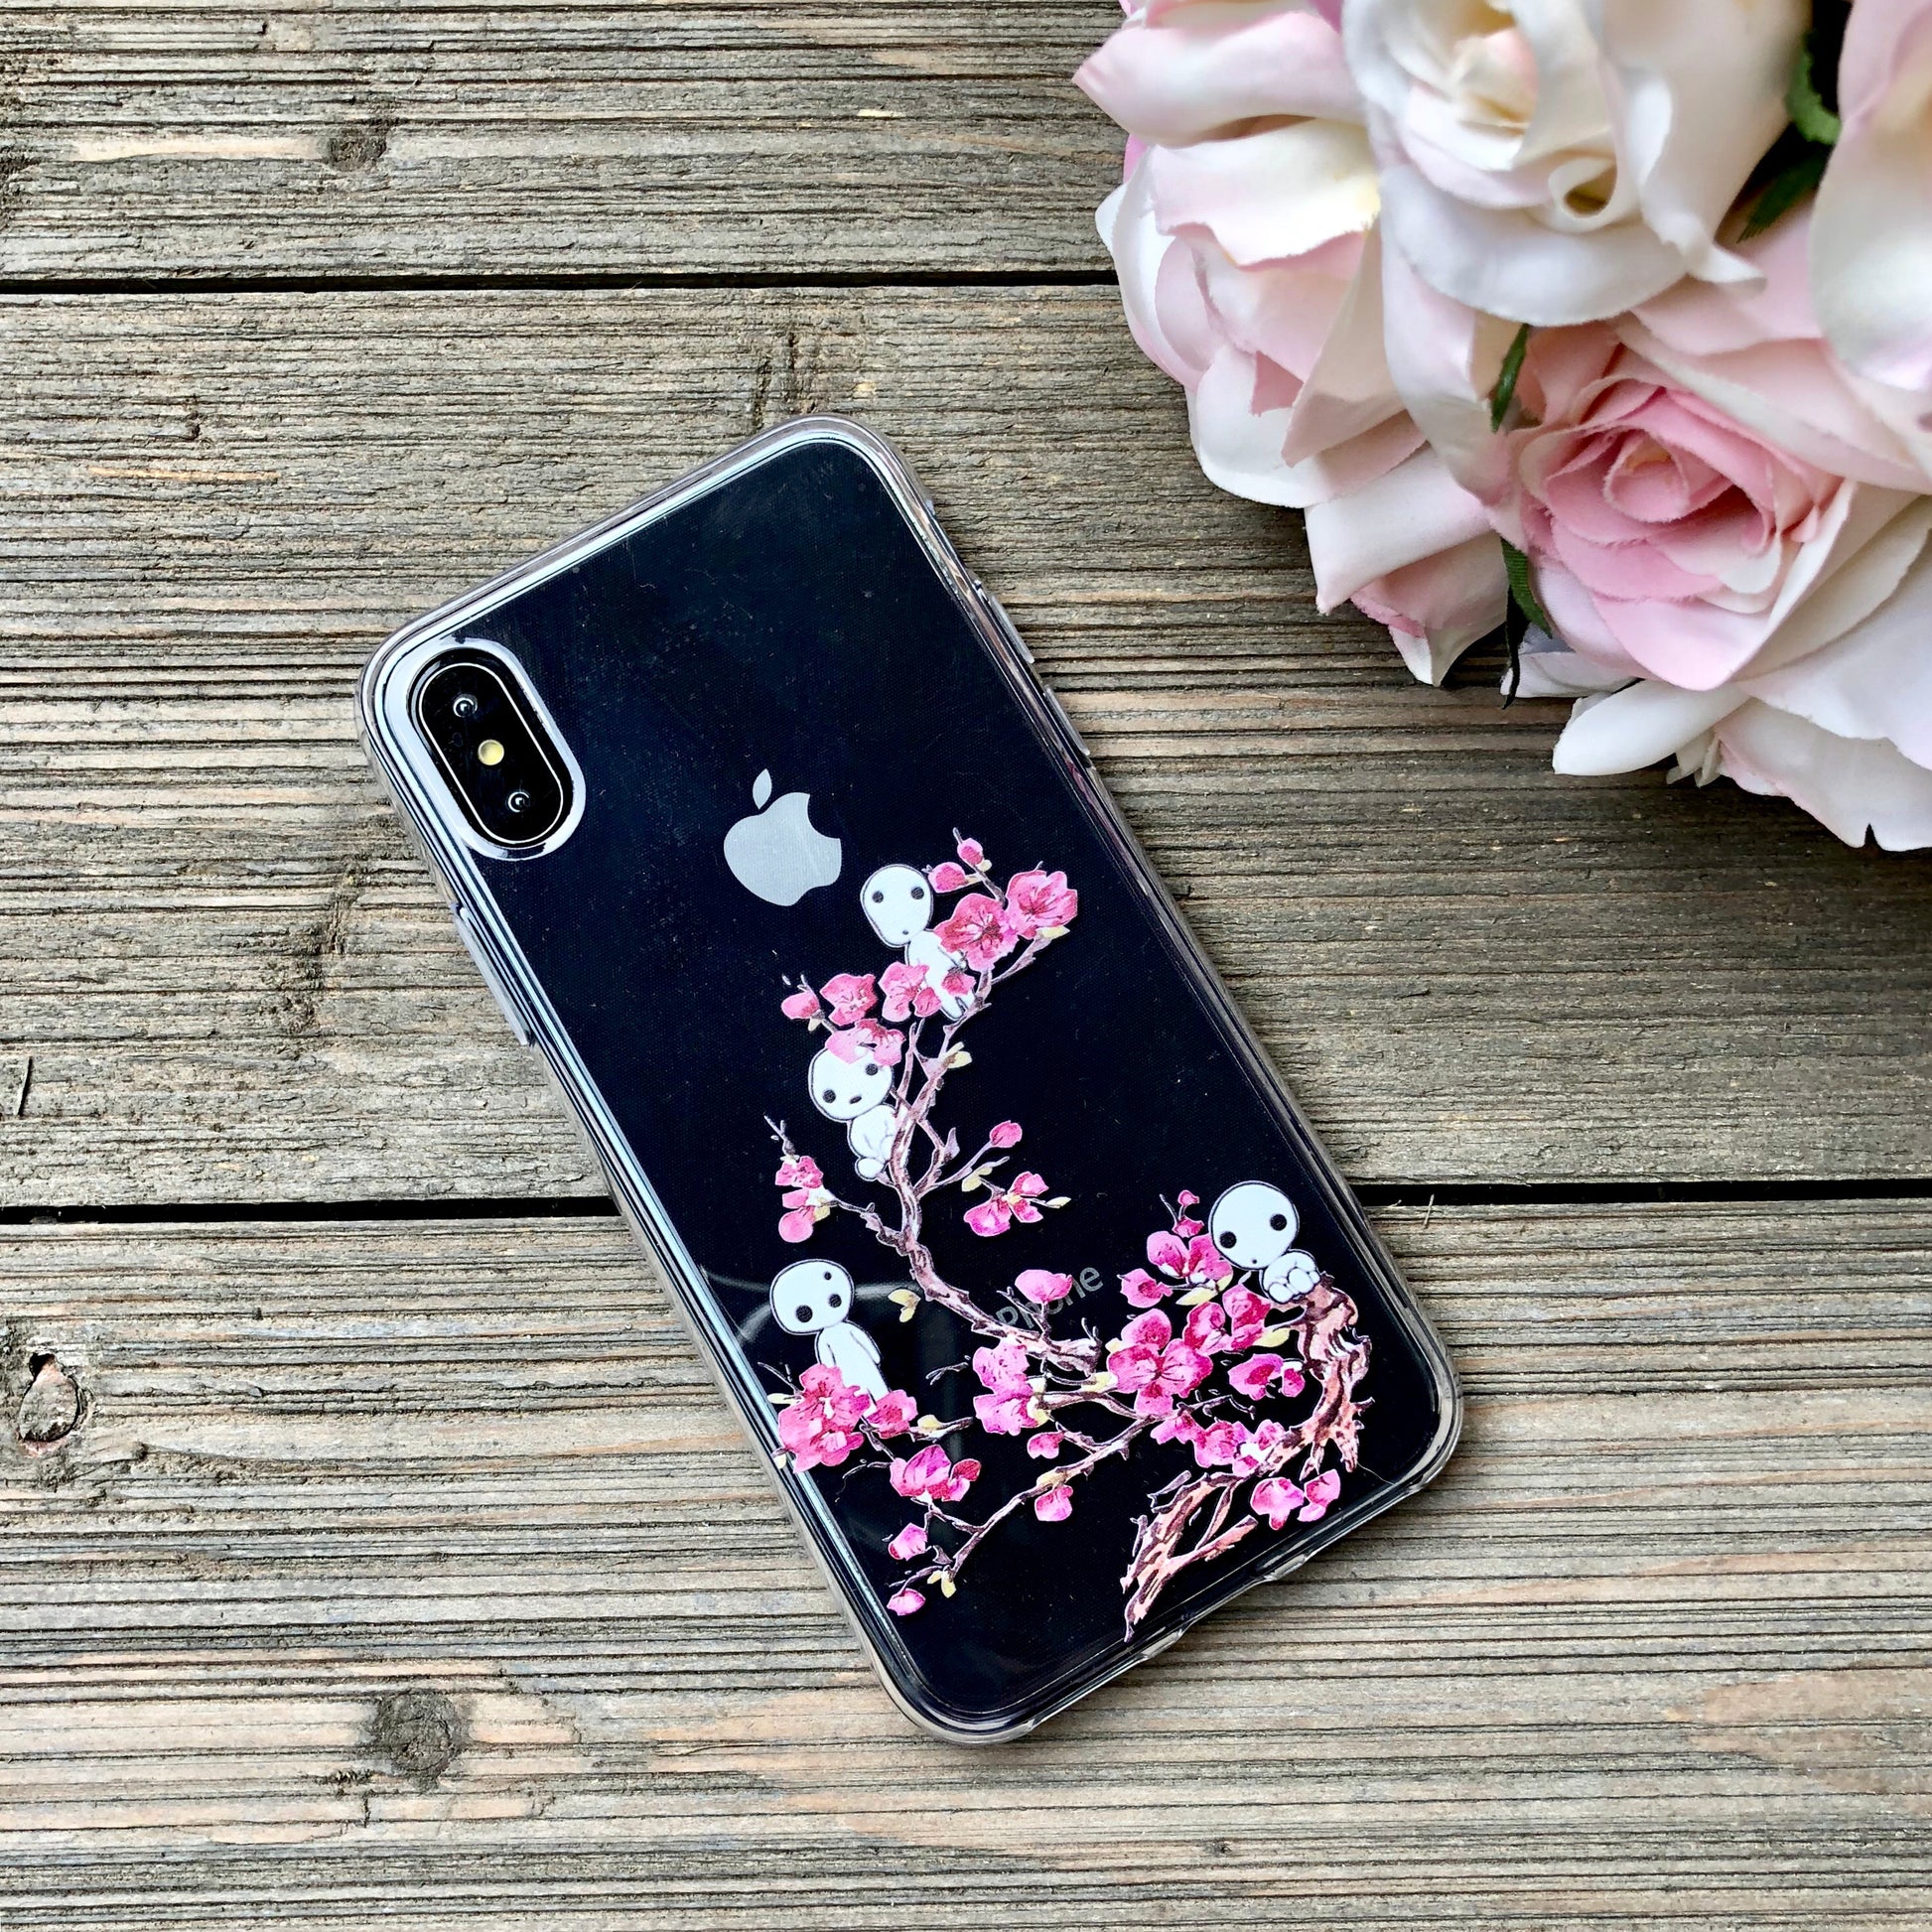 sakura blossoms and forest spirits iphone case